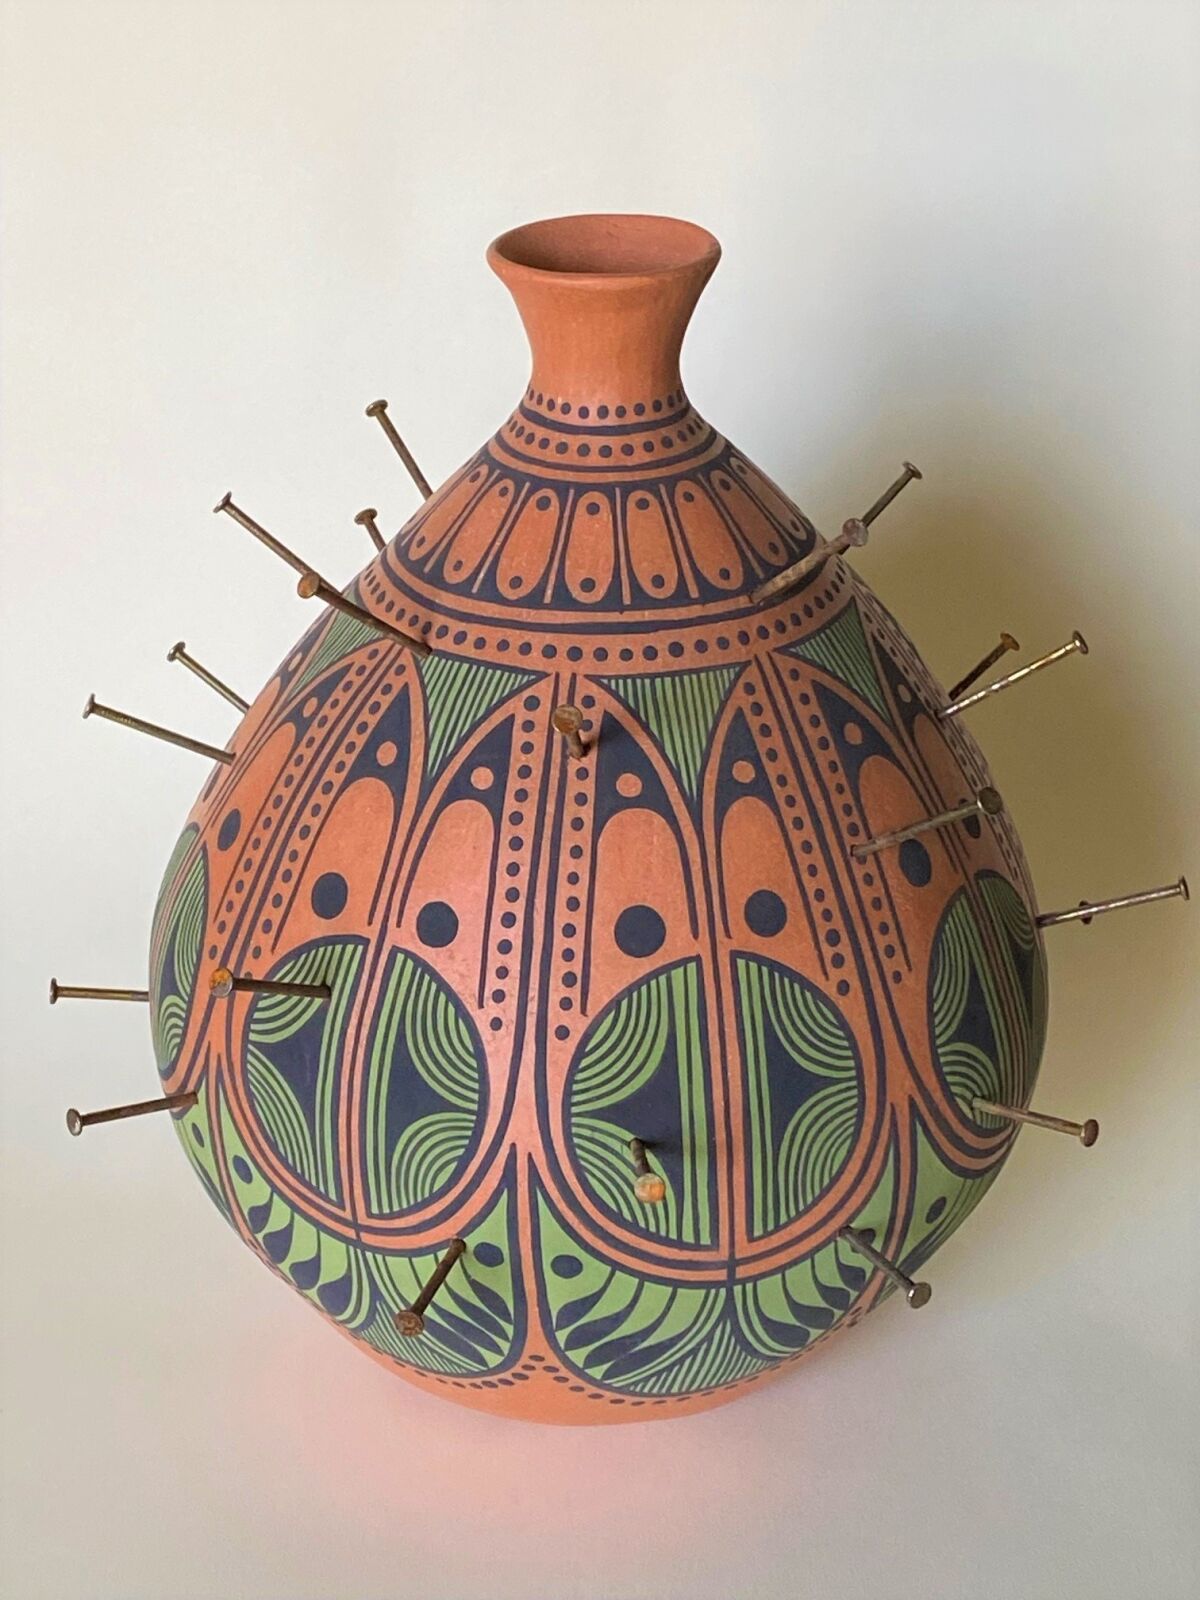 A decorated clay pot spiked with rusty nails.